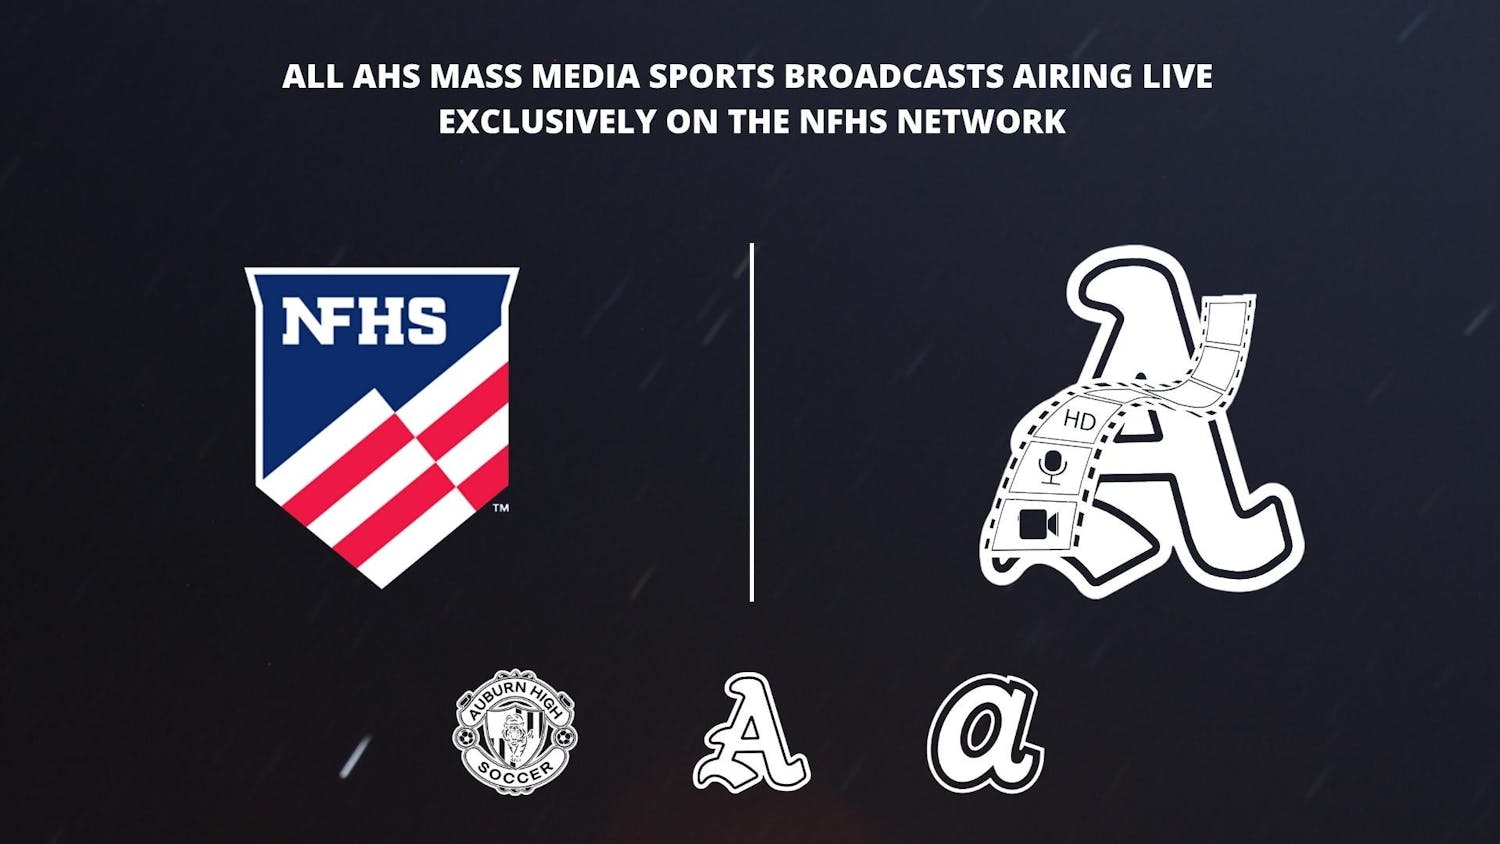 ALL AHS MASS MEDIA SPORTS BROADCASTS AIRING LIVE EXCLUSIVELY ON THE NFHS NETWORK.jpg